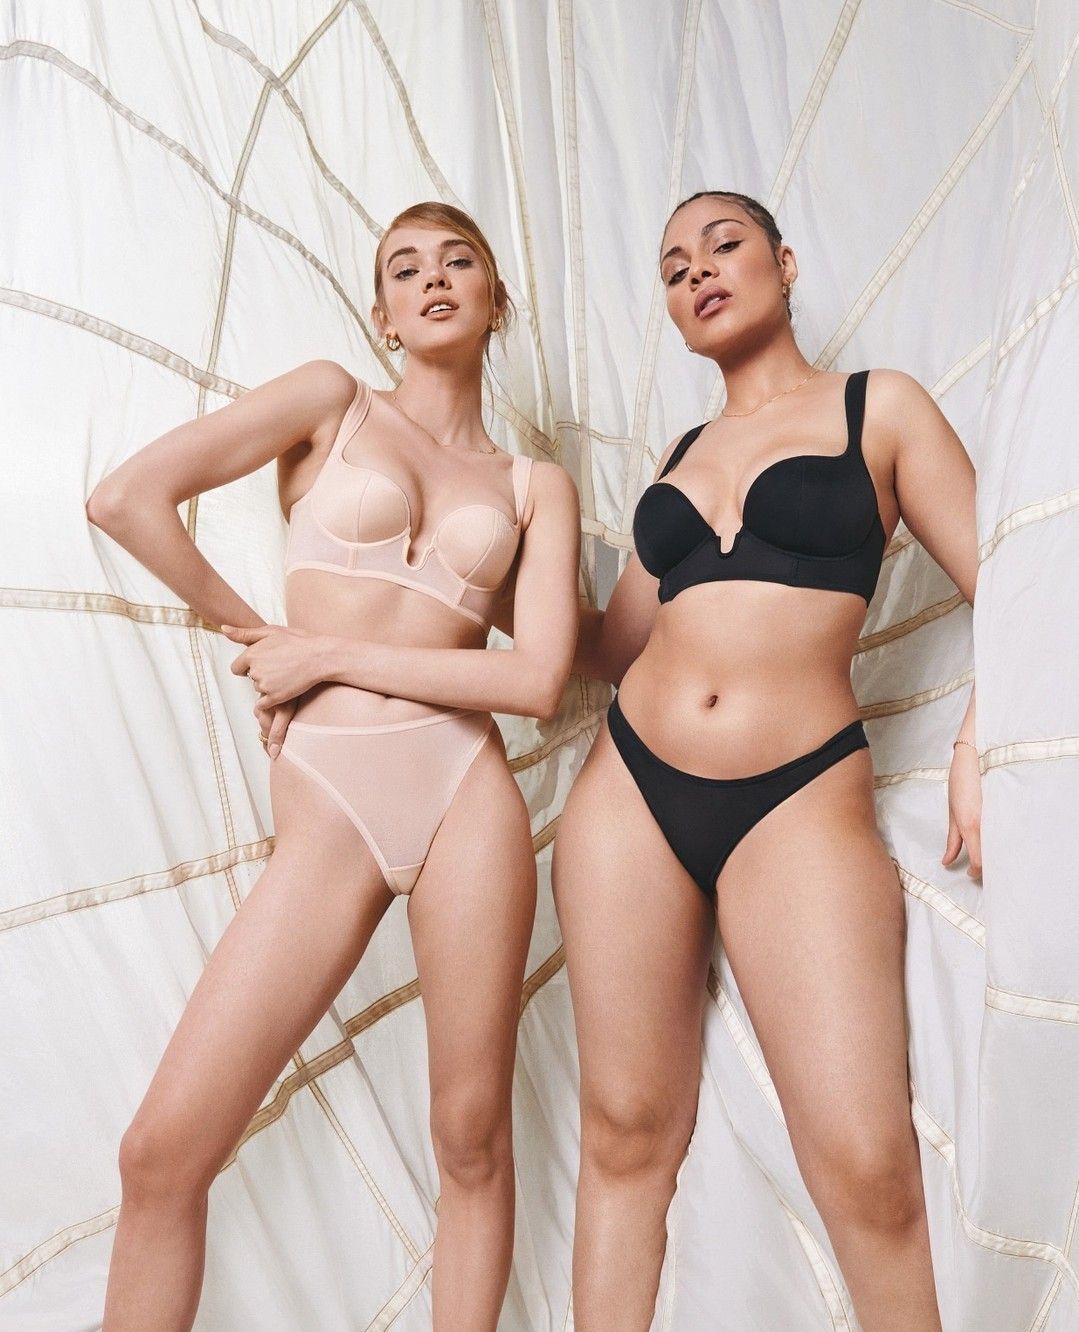 Women's Intimate Underwear - Natural Clothing Company